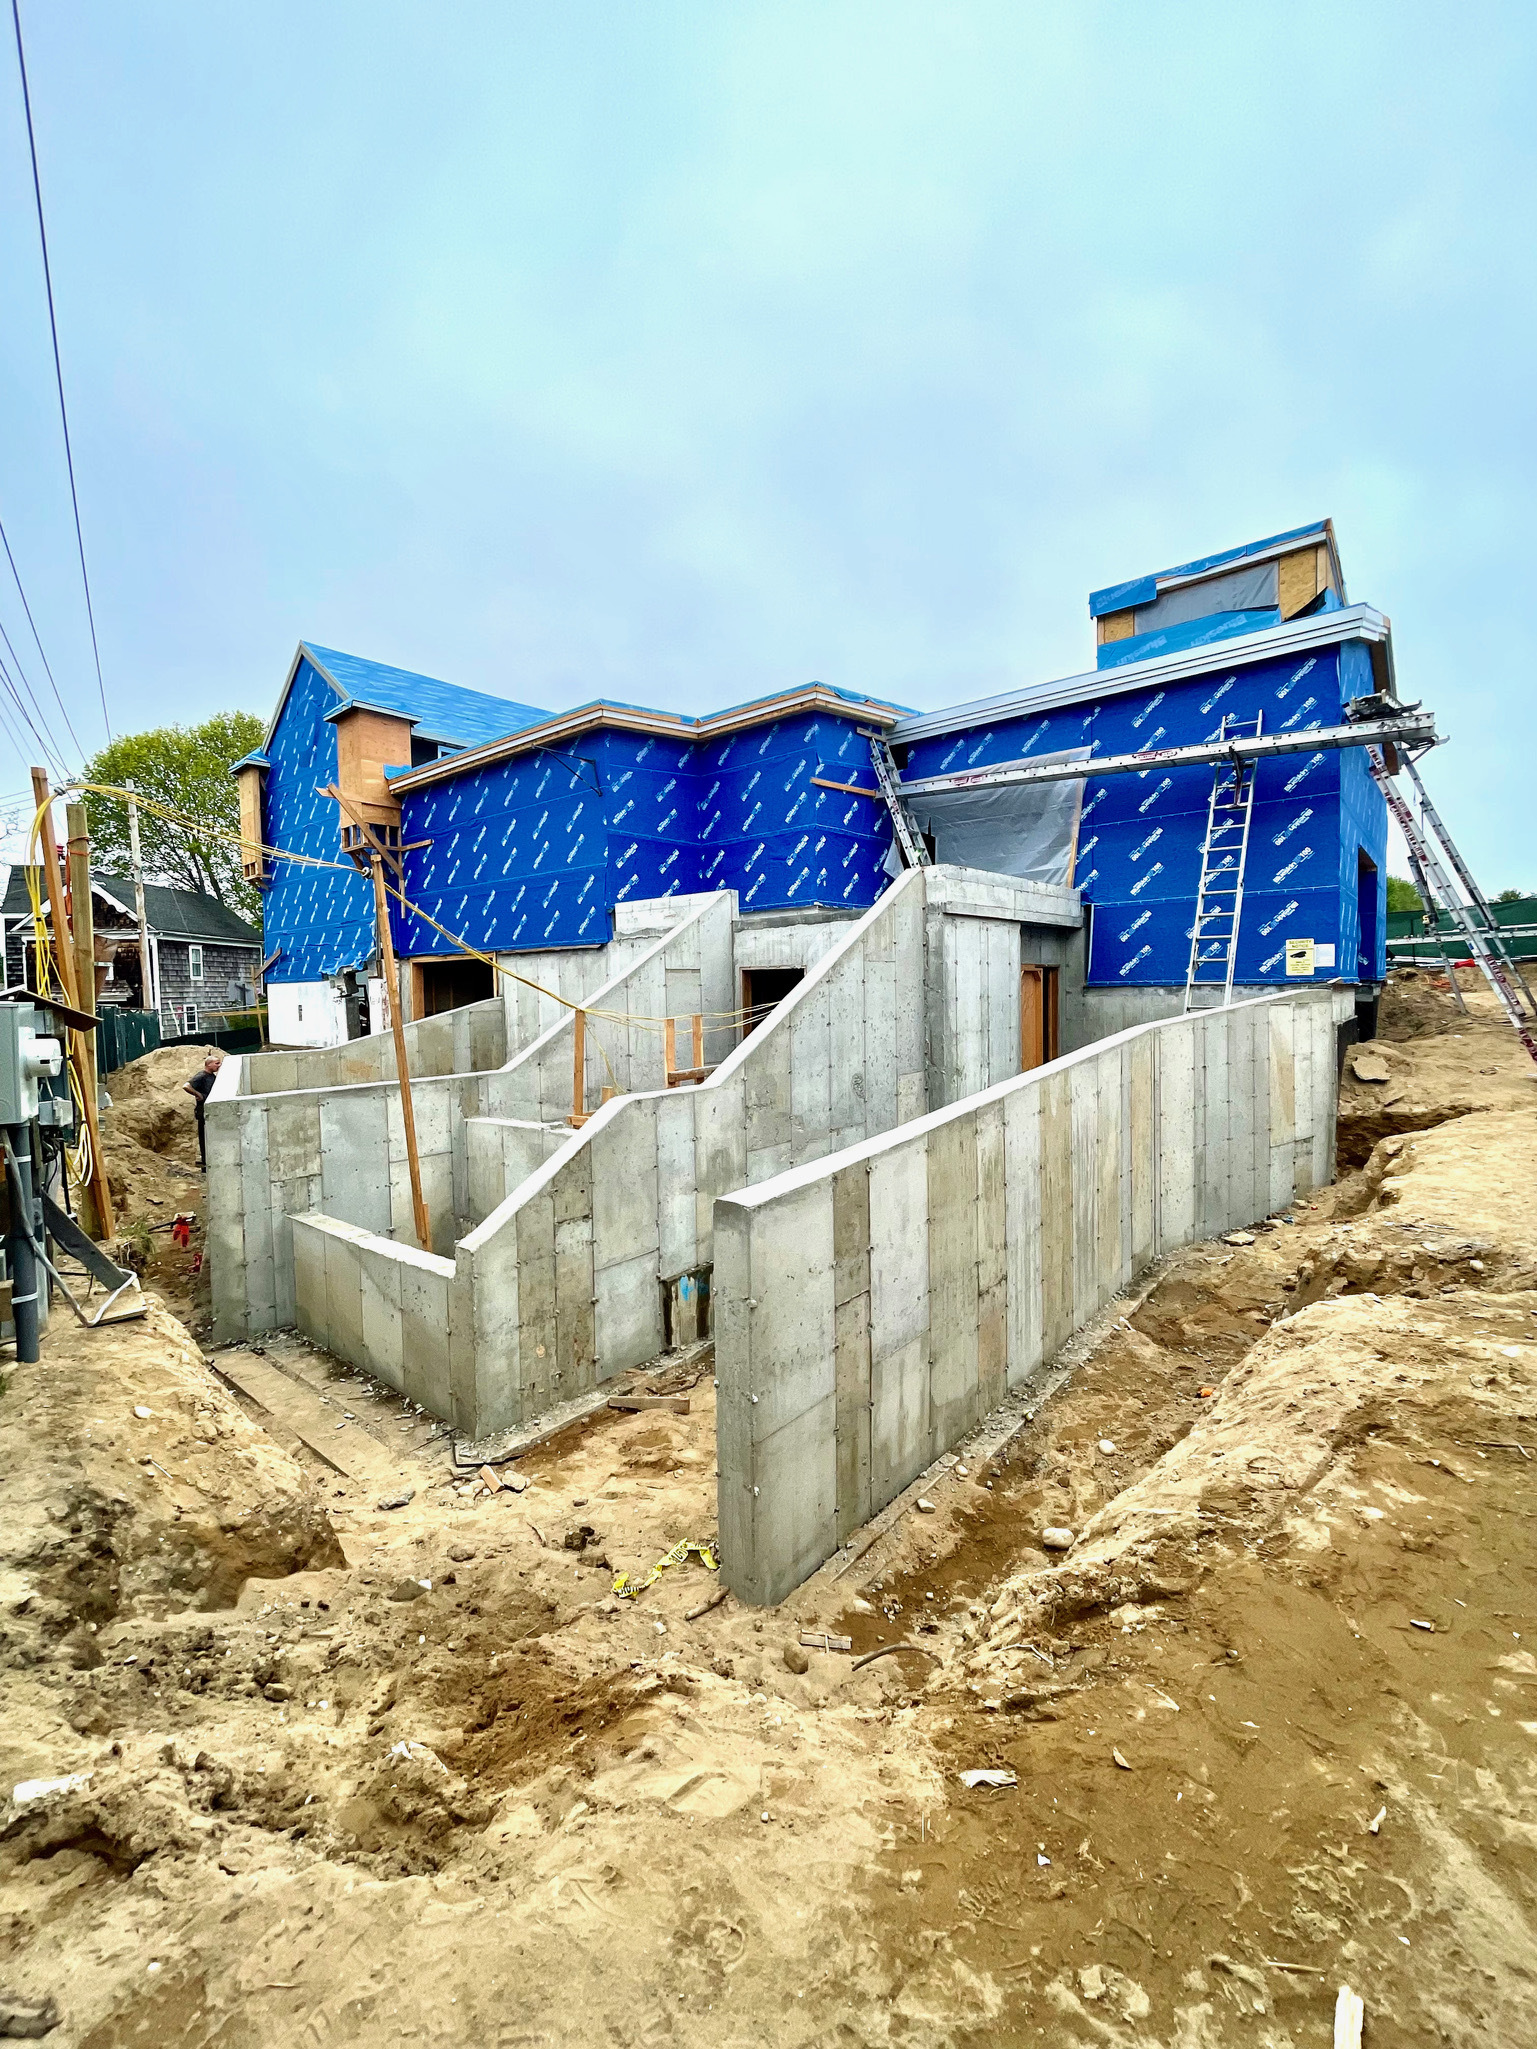 New foundation walls were put in place during the Temple Adas Israel renovation. RIVALYN ZWEIG PHOTOS